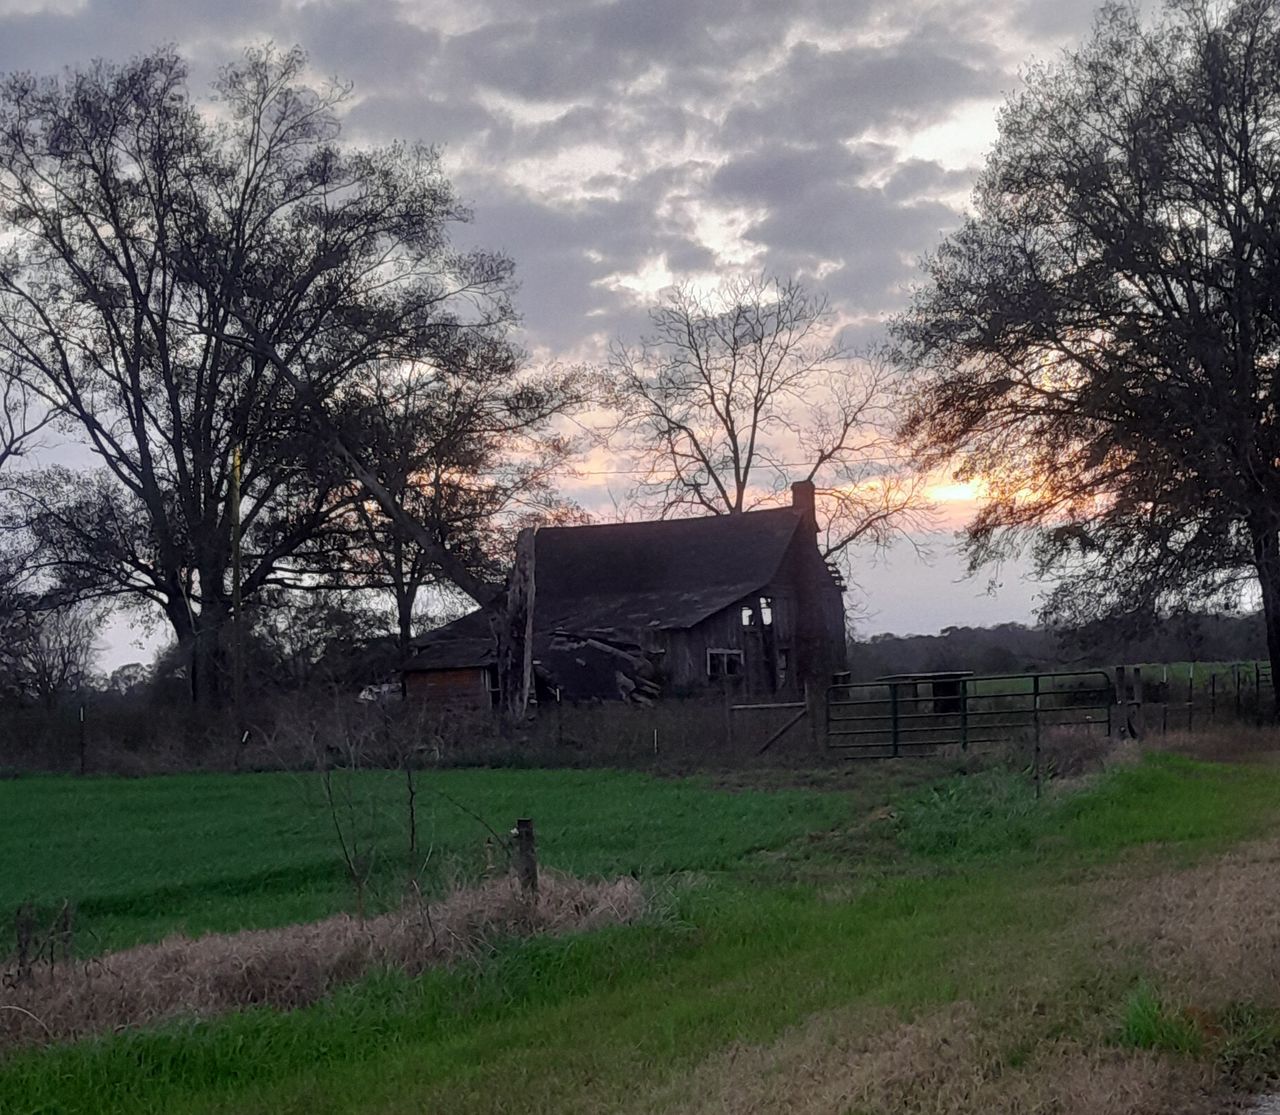 tree, plant, sky, rural area, cloud, architecture, nature, farm, built structure, grass, landscape, field, house, building, building exterior, no people, land, bare tree, environment, rural scene, morning, outdoors, fence, beauty in nature, agricultural building, abandoned, tranquility